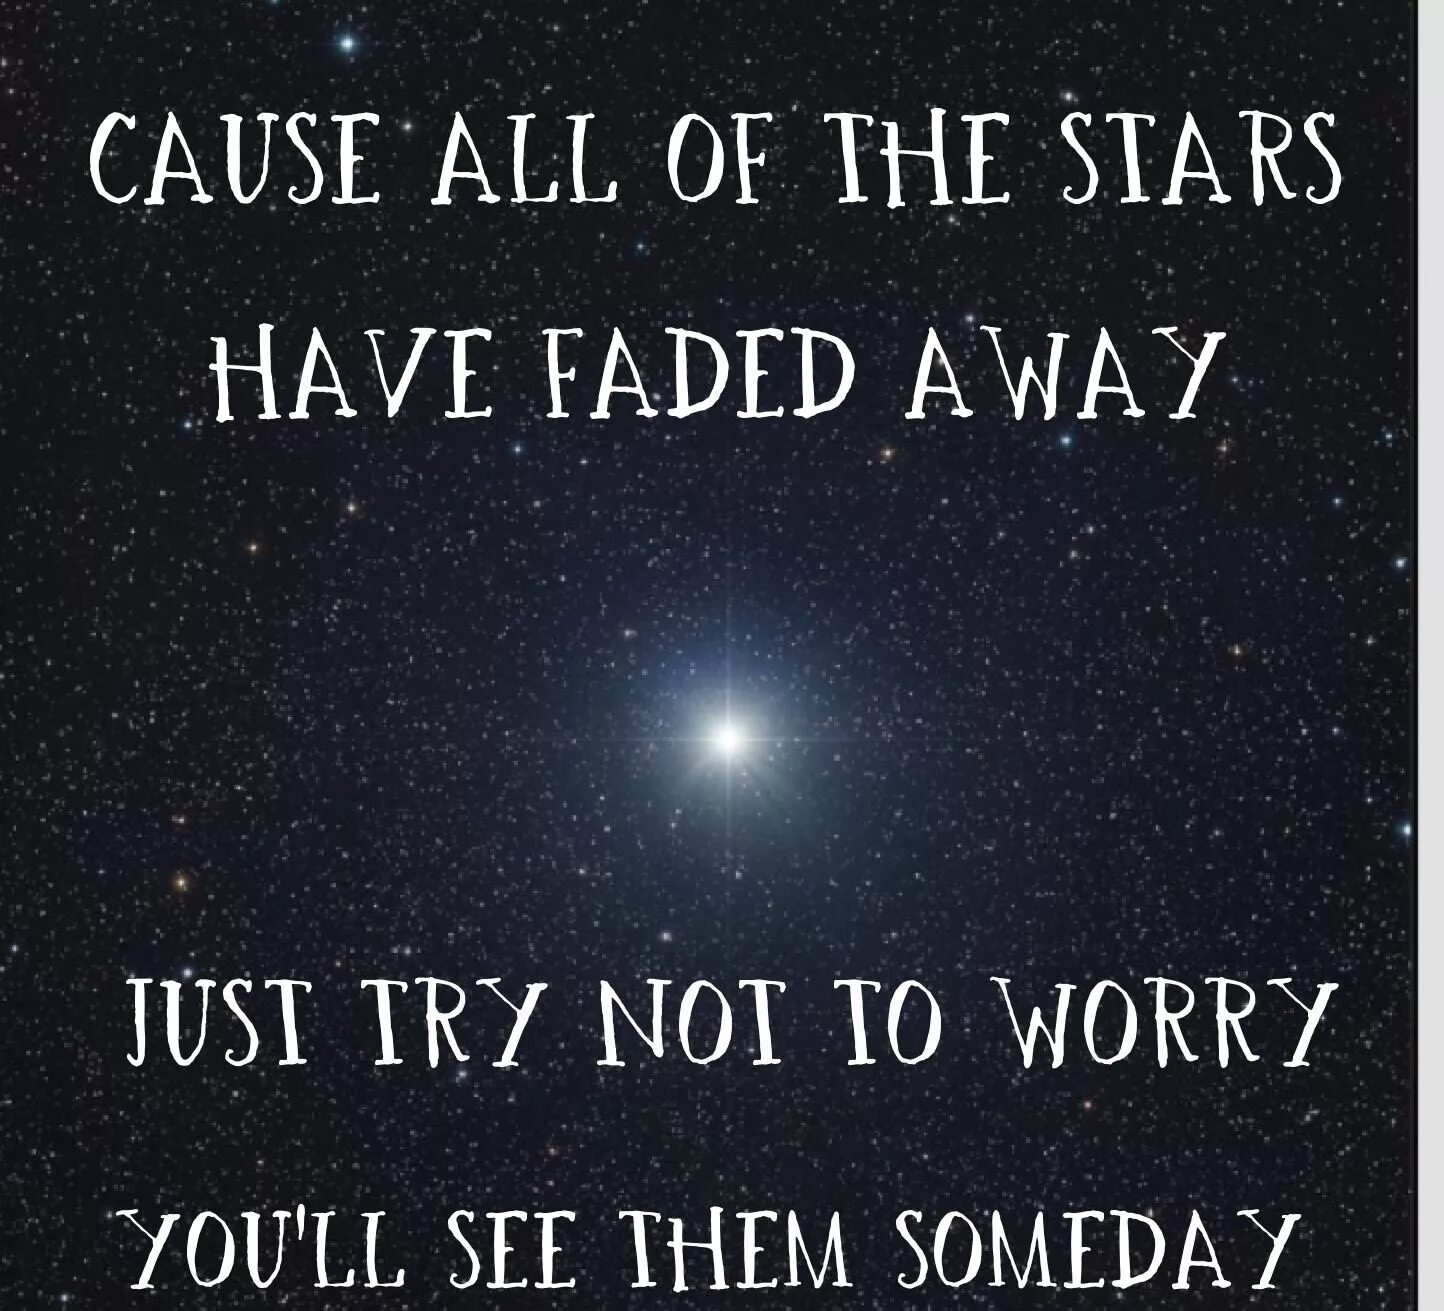 Messages from the stars the rah. All Star. Картинки all Star. To the Stars текст. All of the Stars have a reason.